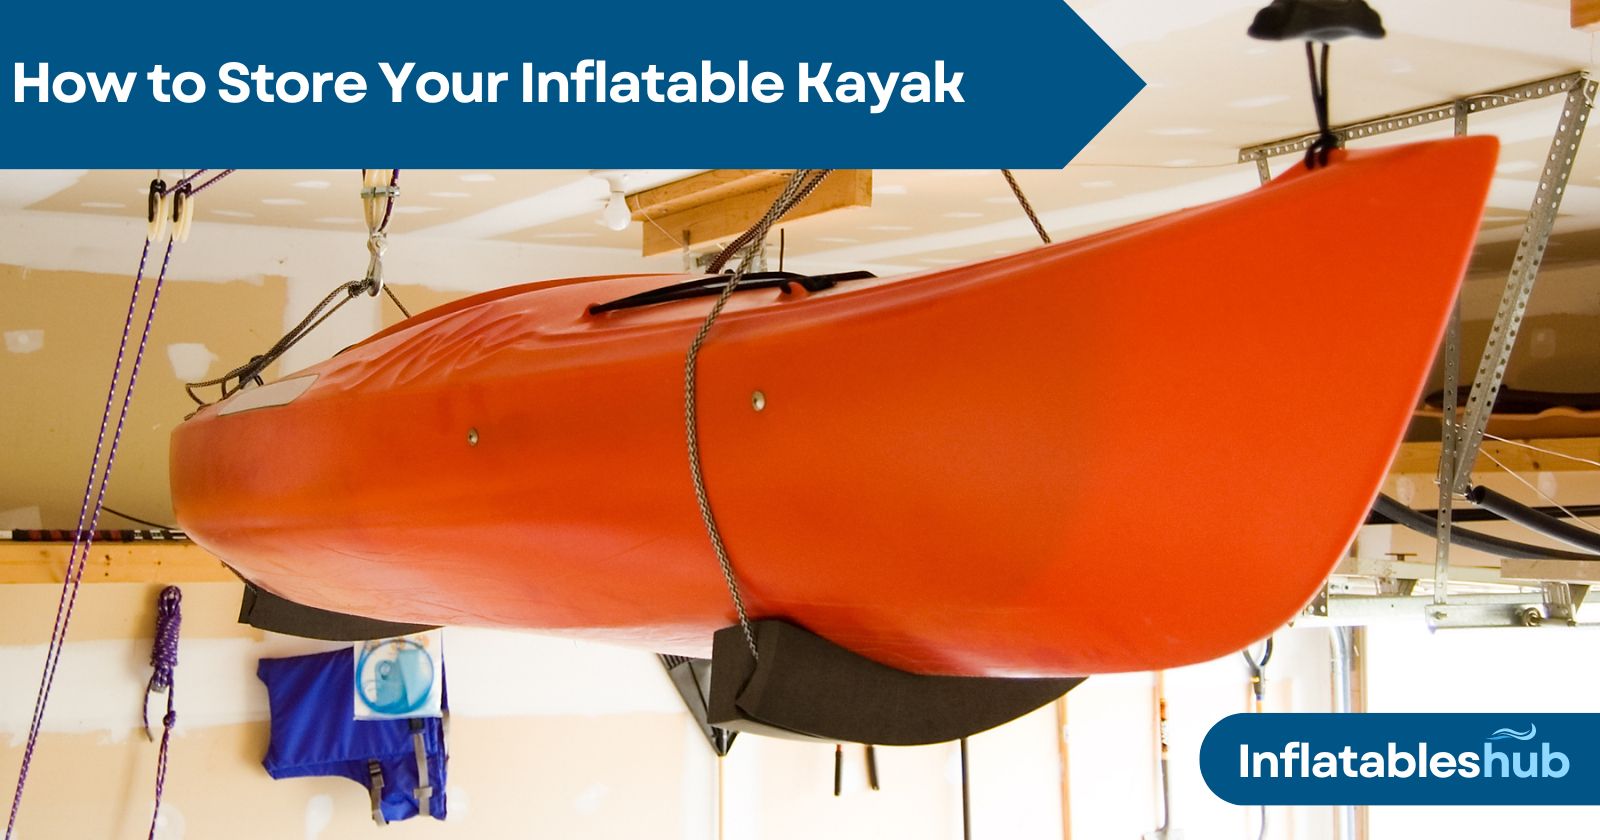 How to Store Your Inflatable Kayak